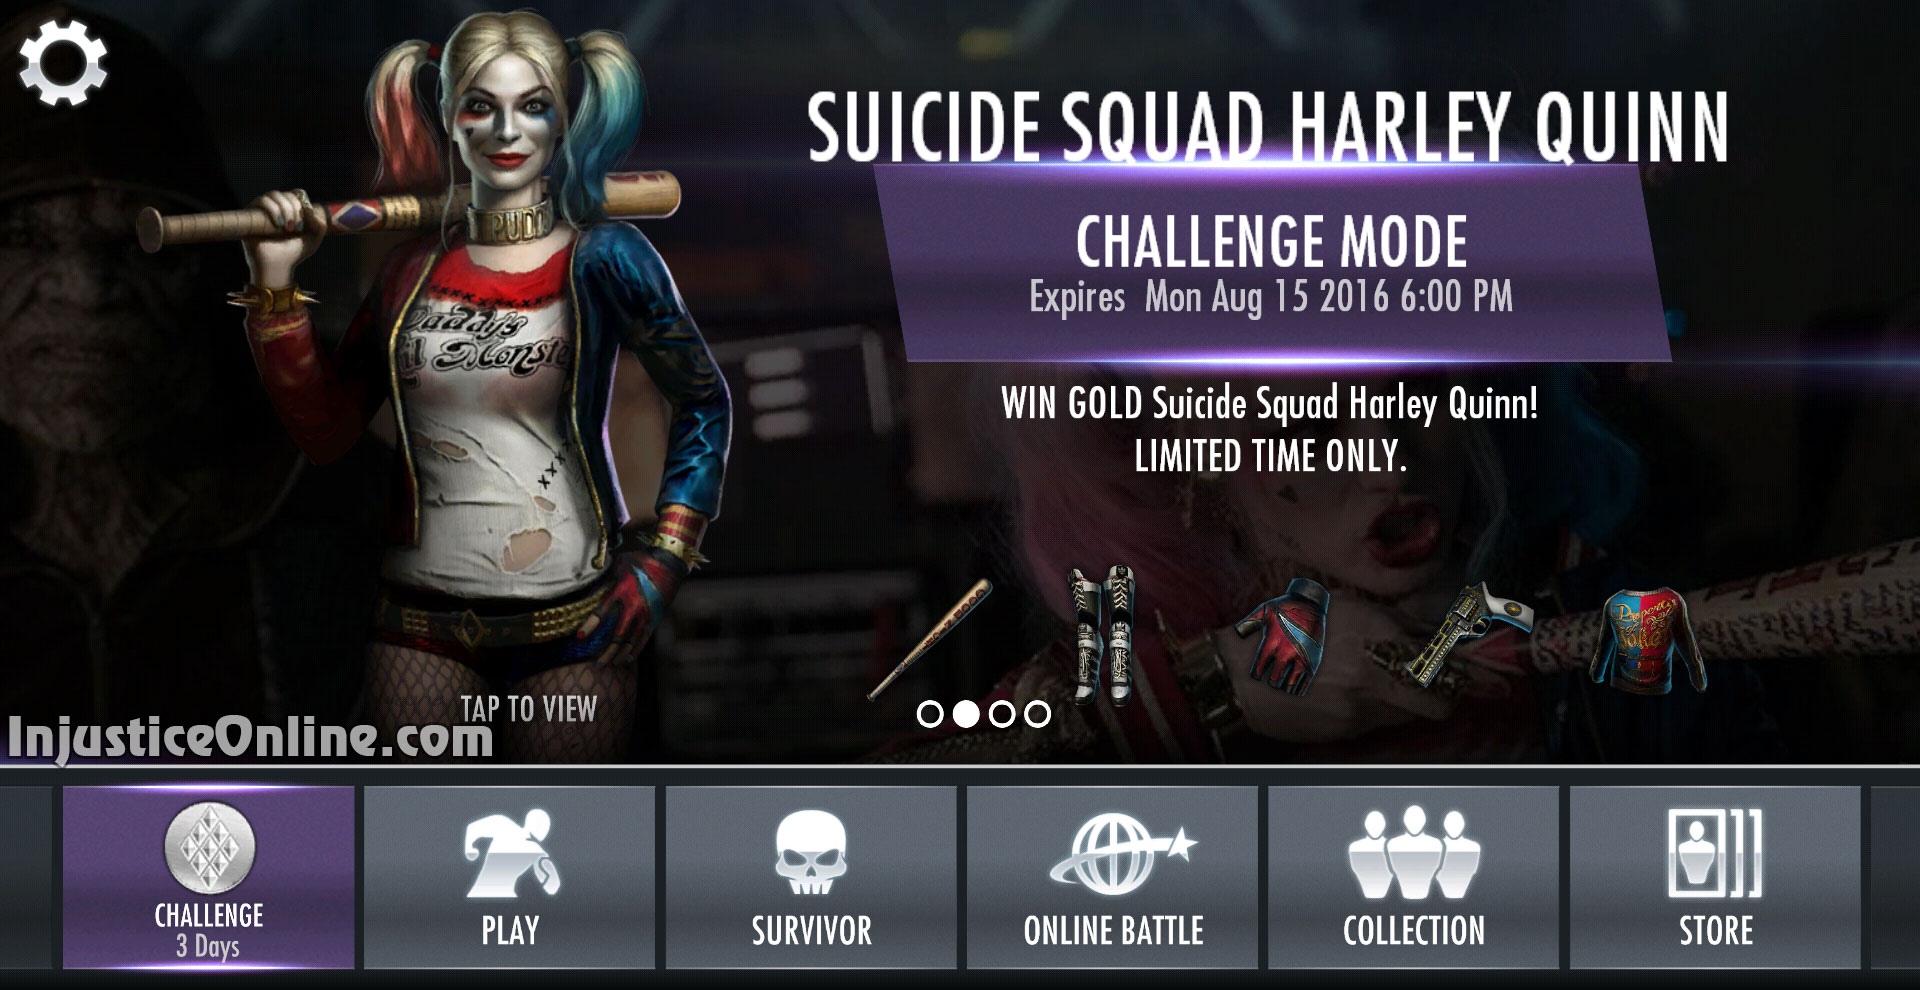 Suicide Squad Harley Quinn is the second Suicide Squad character from the I...